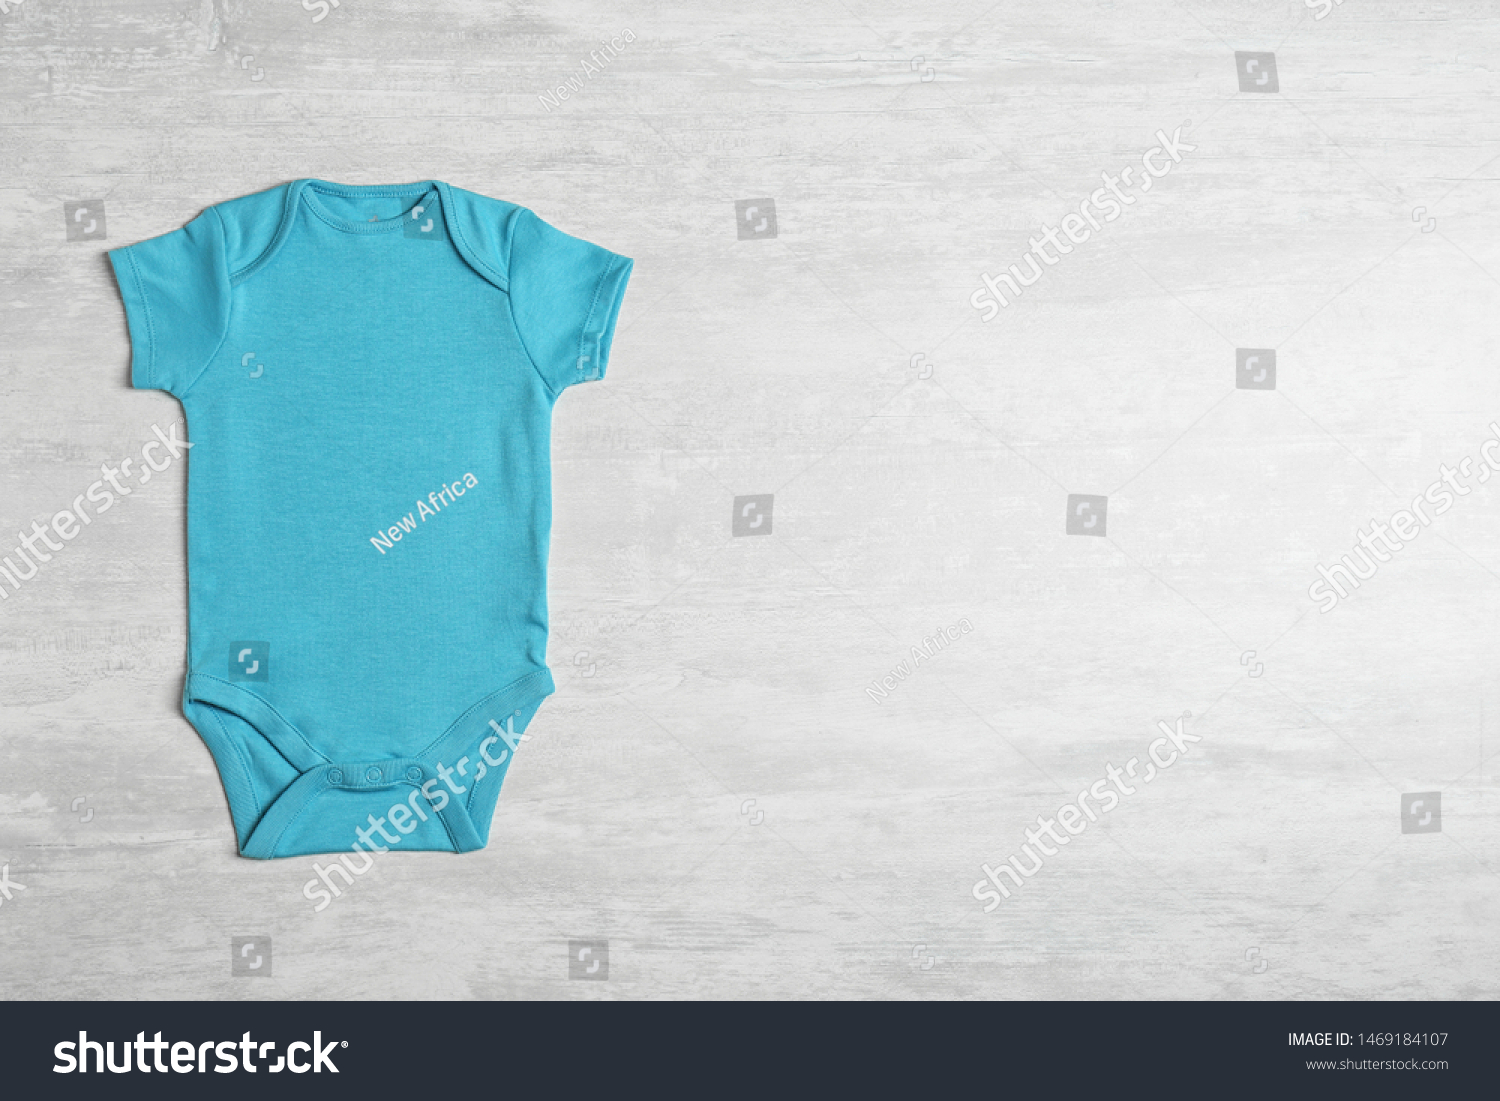 Baby bodysuit on wooden background, top view. Space for text #1469184107